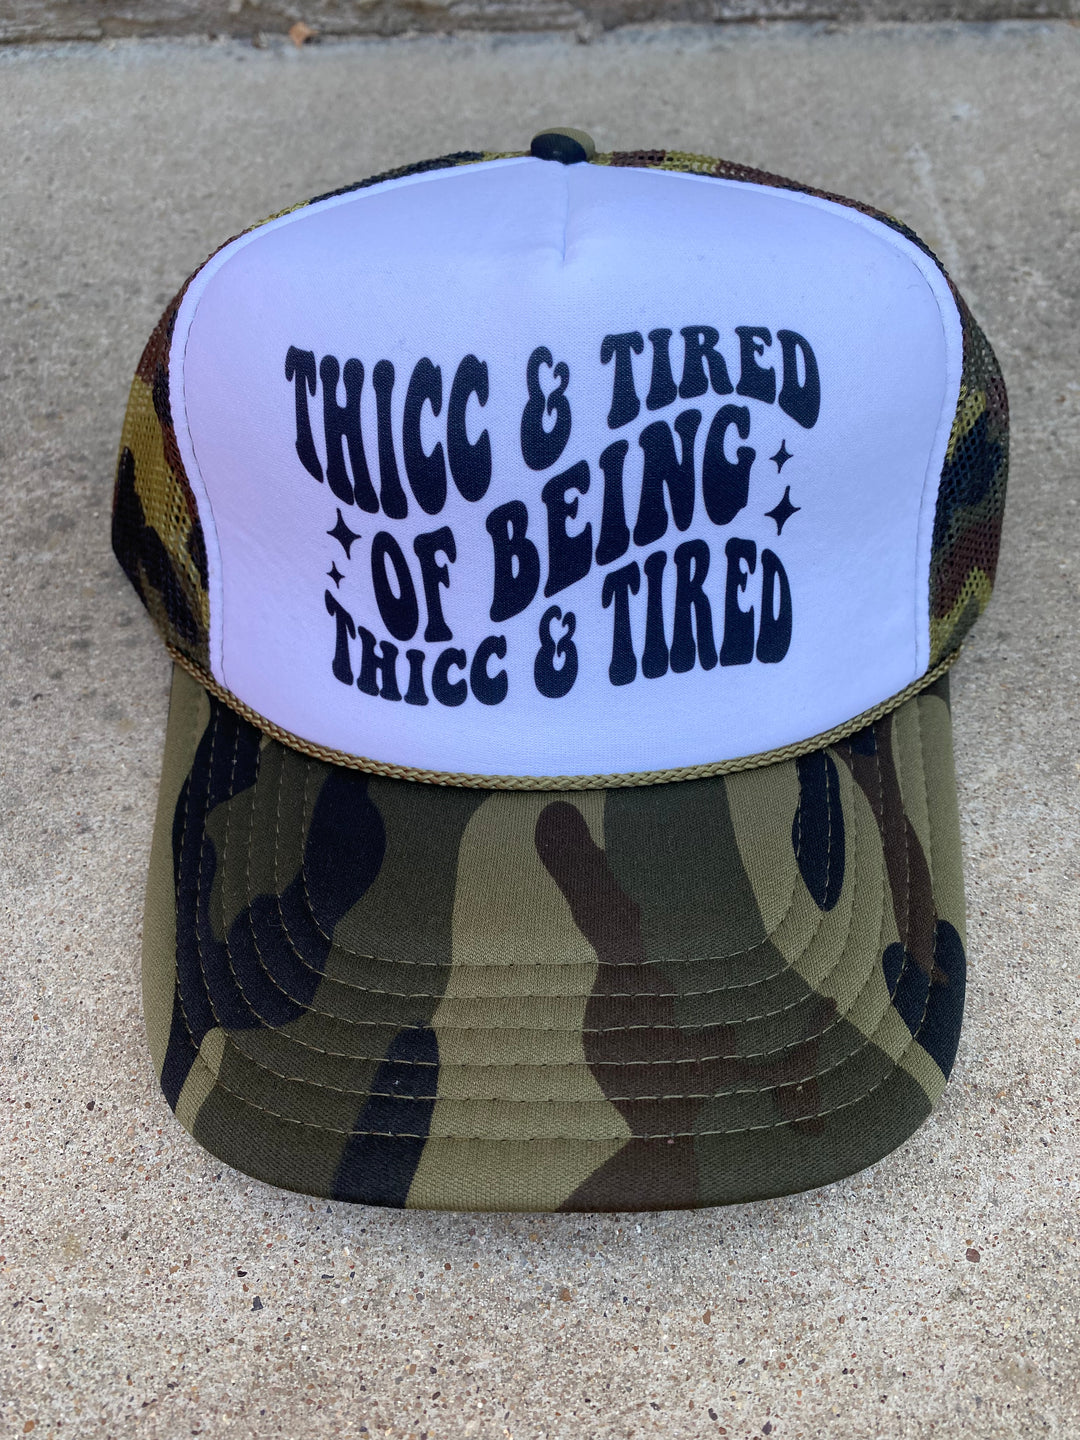 Thicc & Tired Trucker Hat